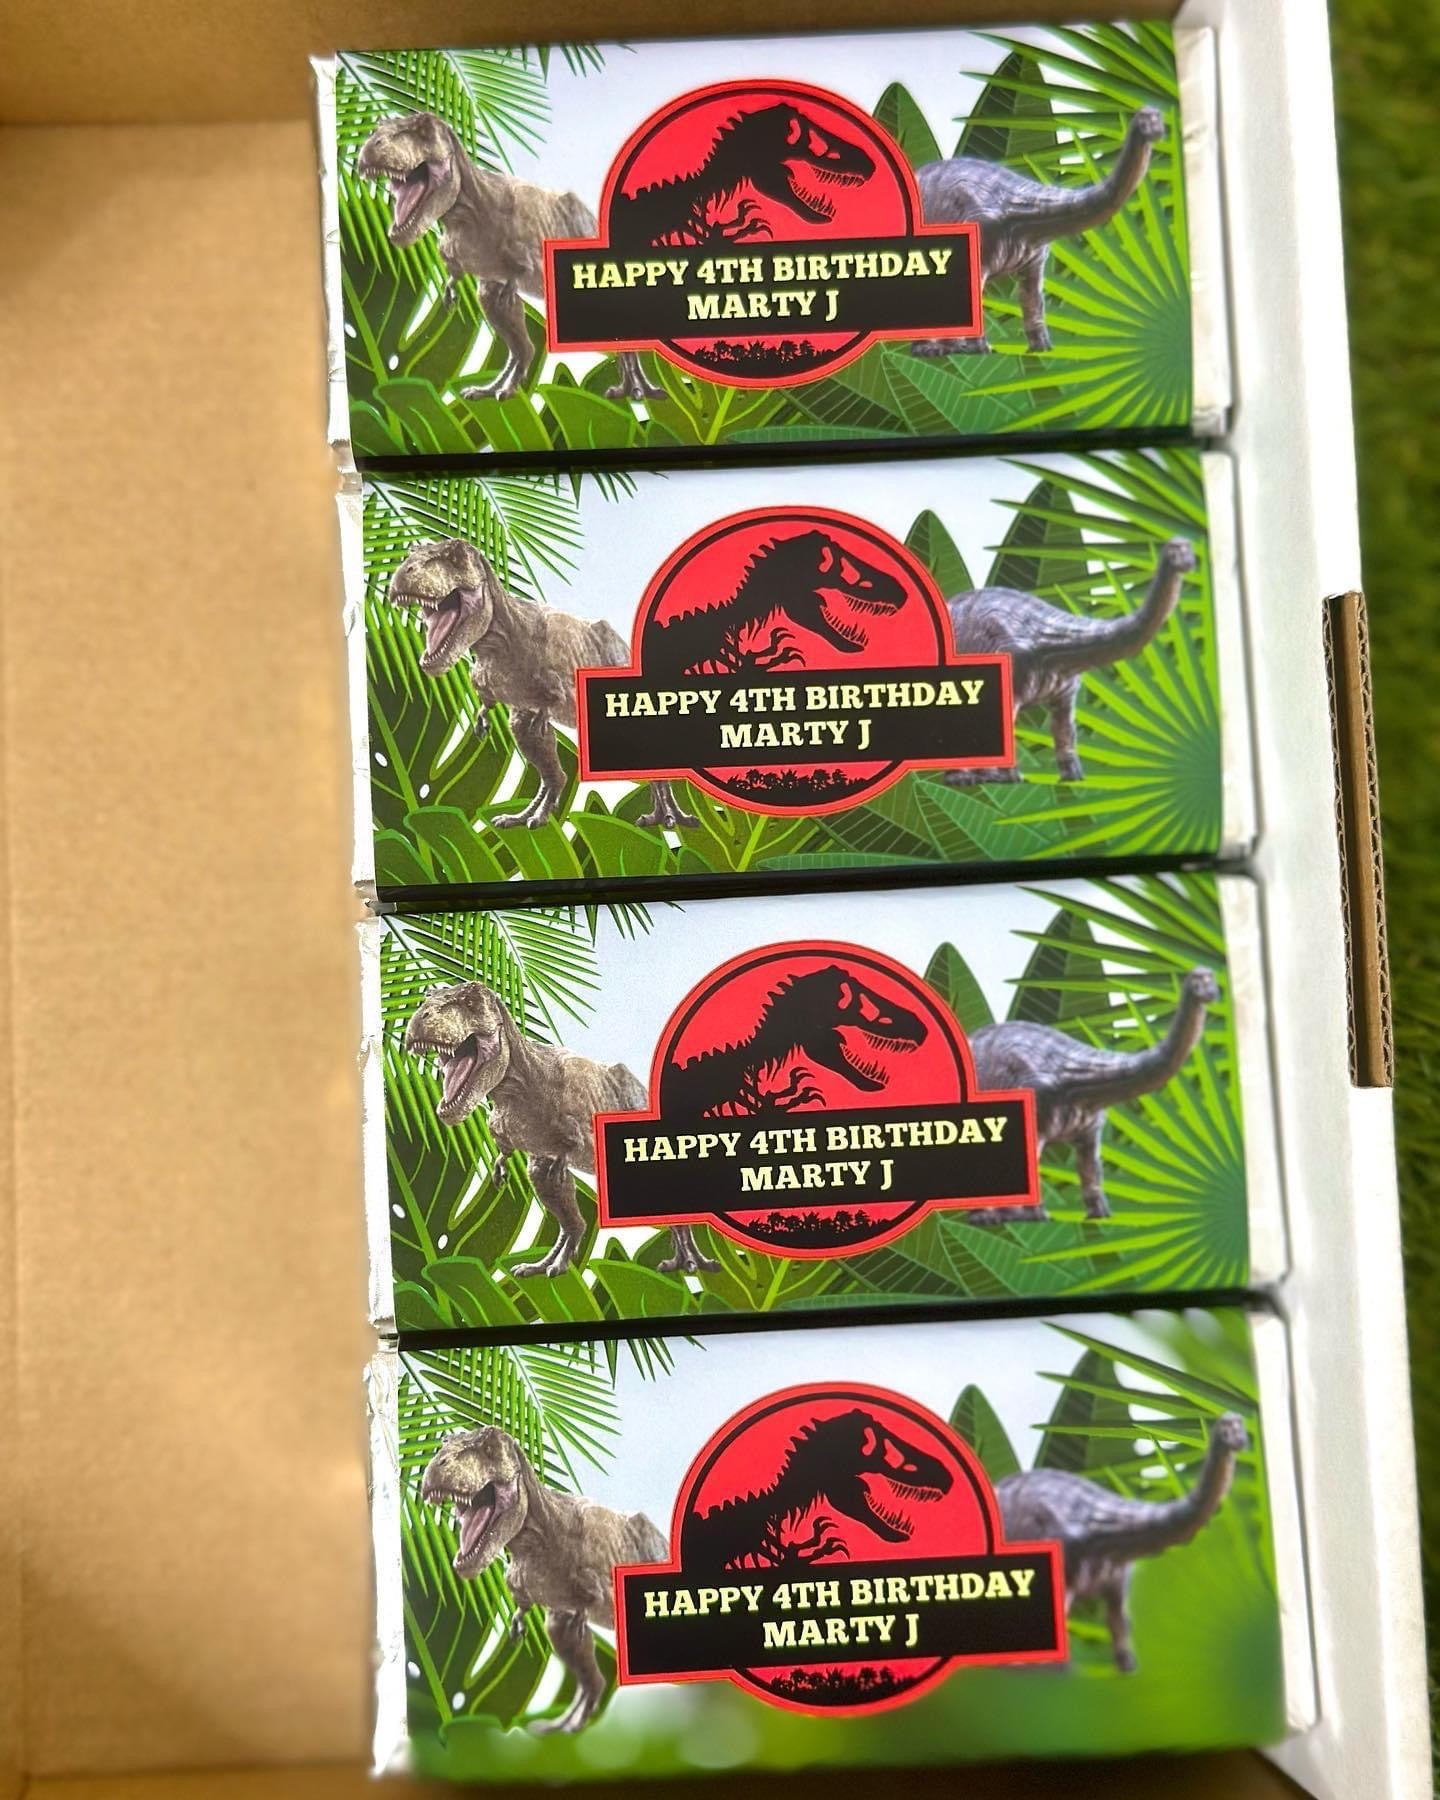 Jurassic Park #3 Personalised Chocolate Bar Party Favour x 4